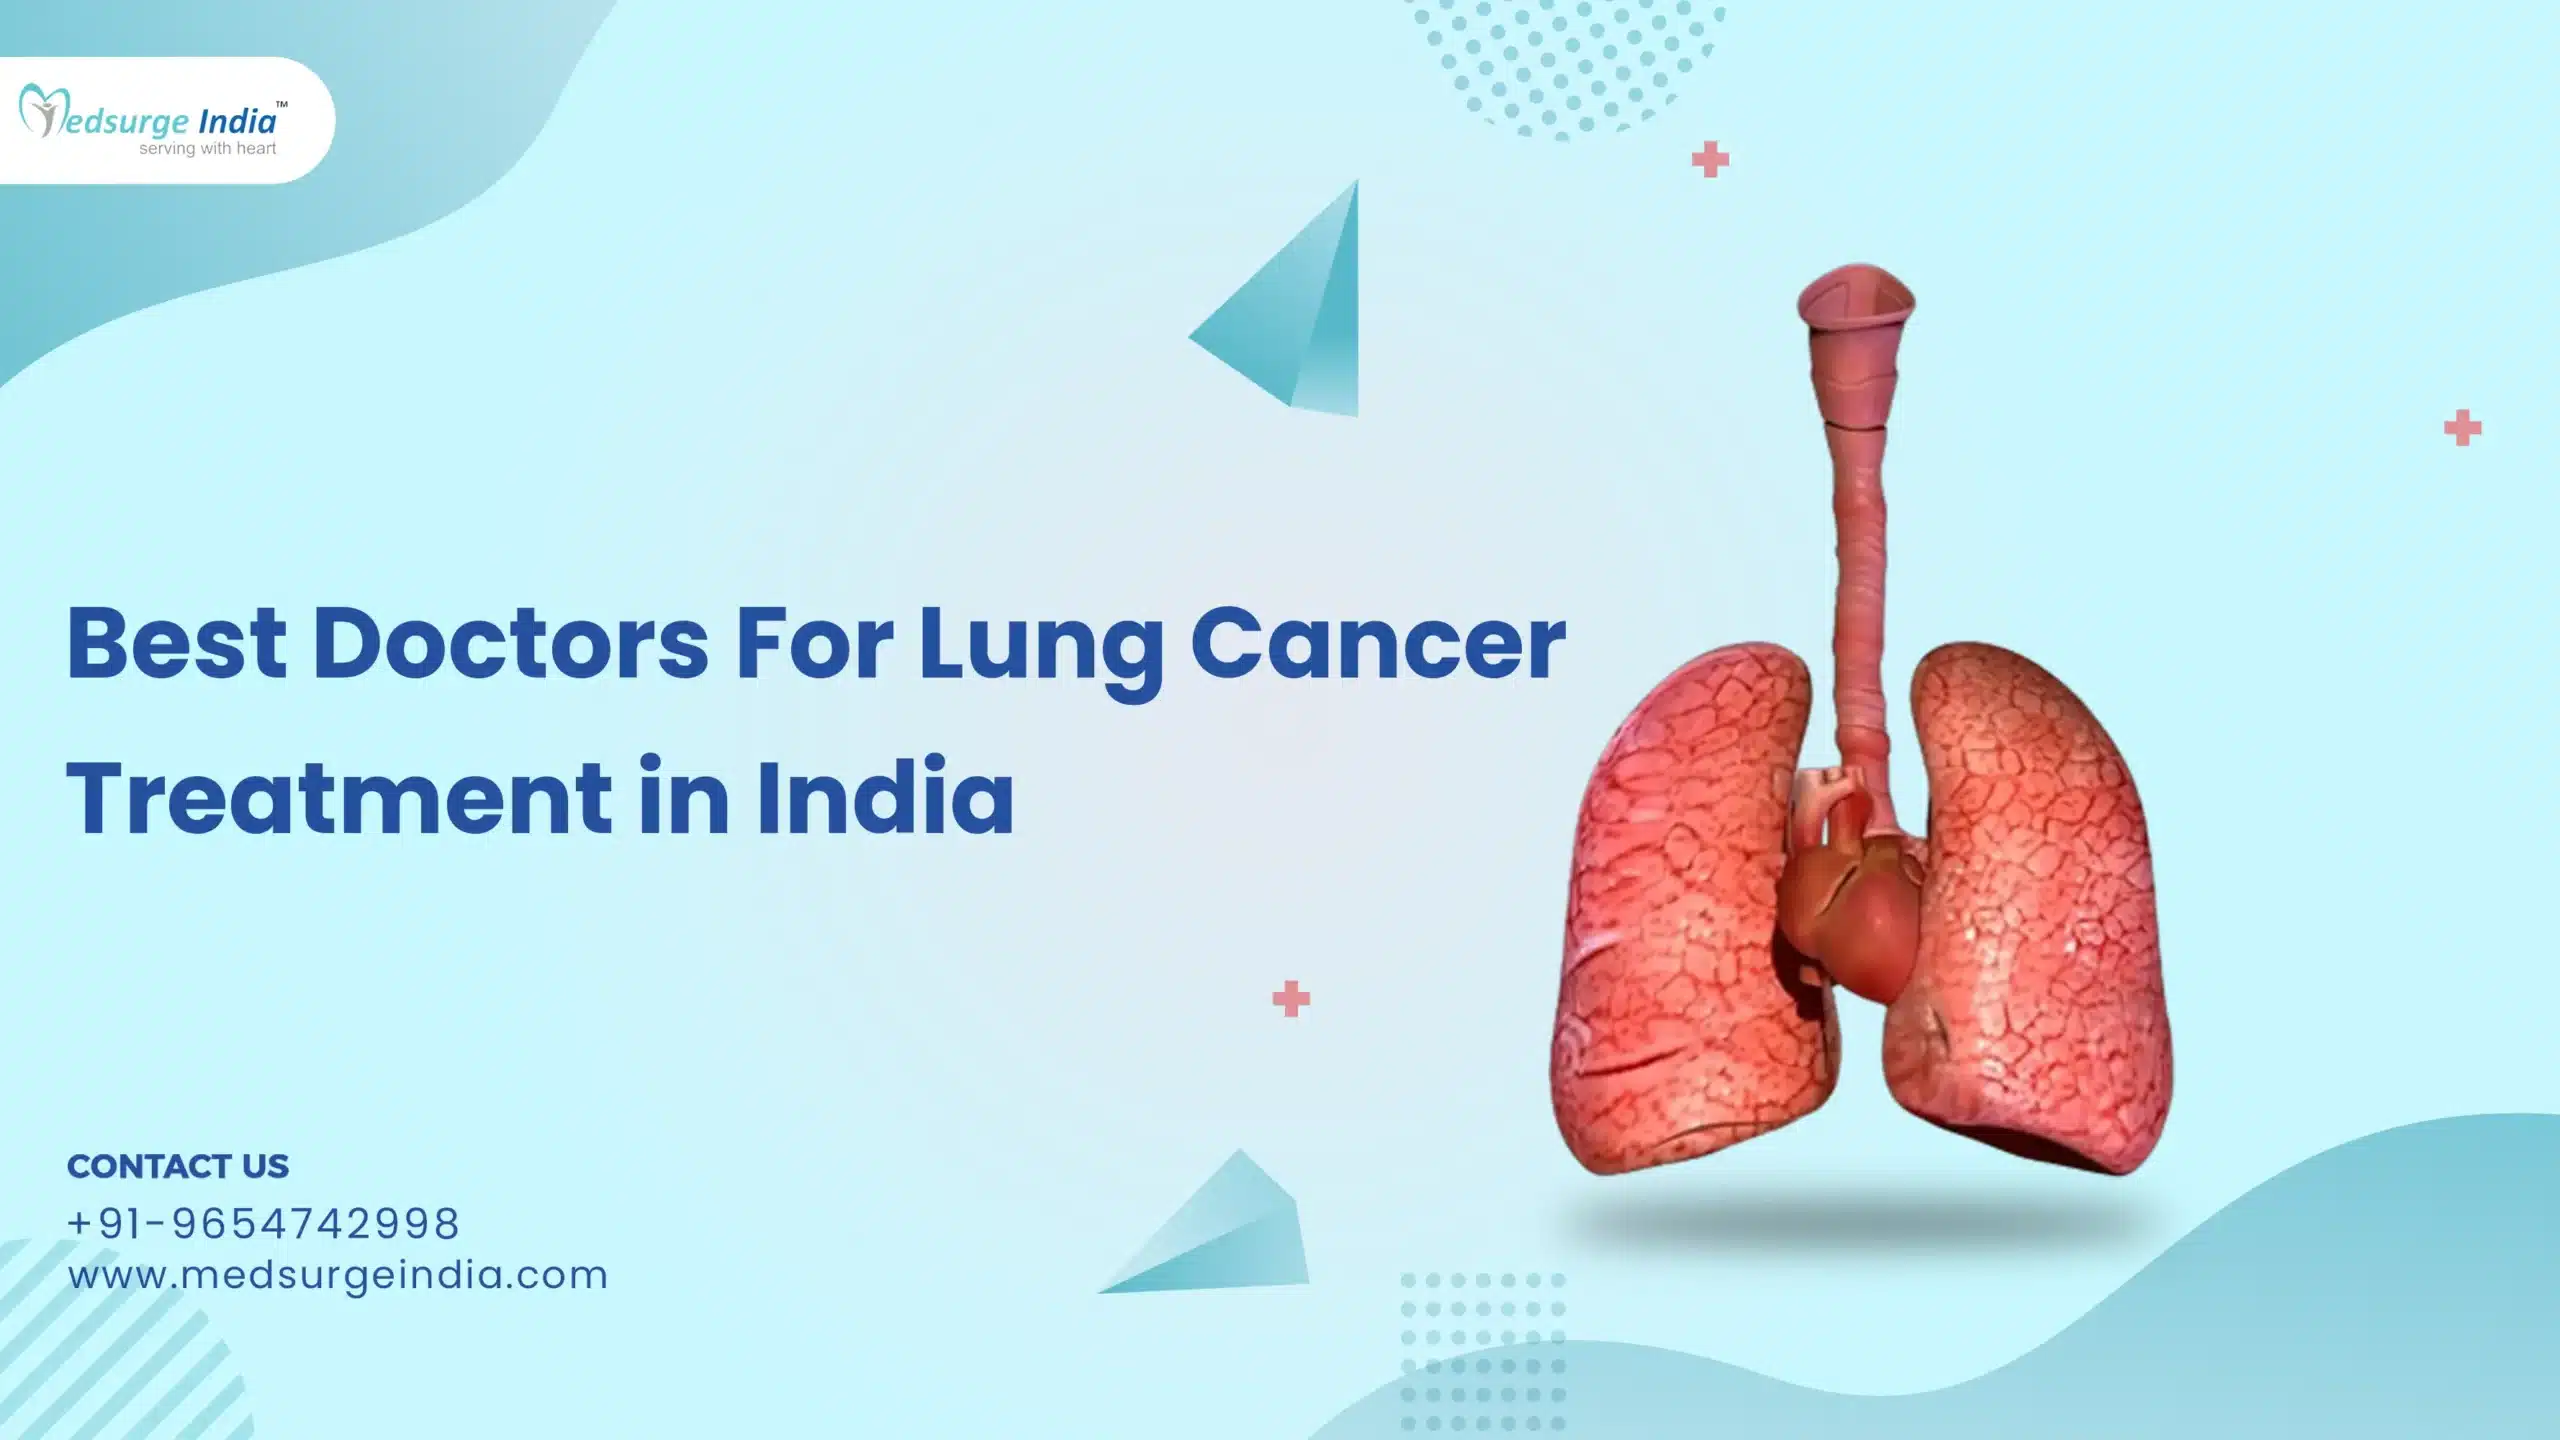 Best Doctors For Lung Cancer Treatment in India